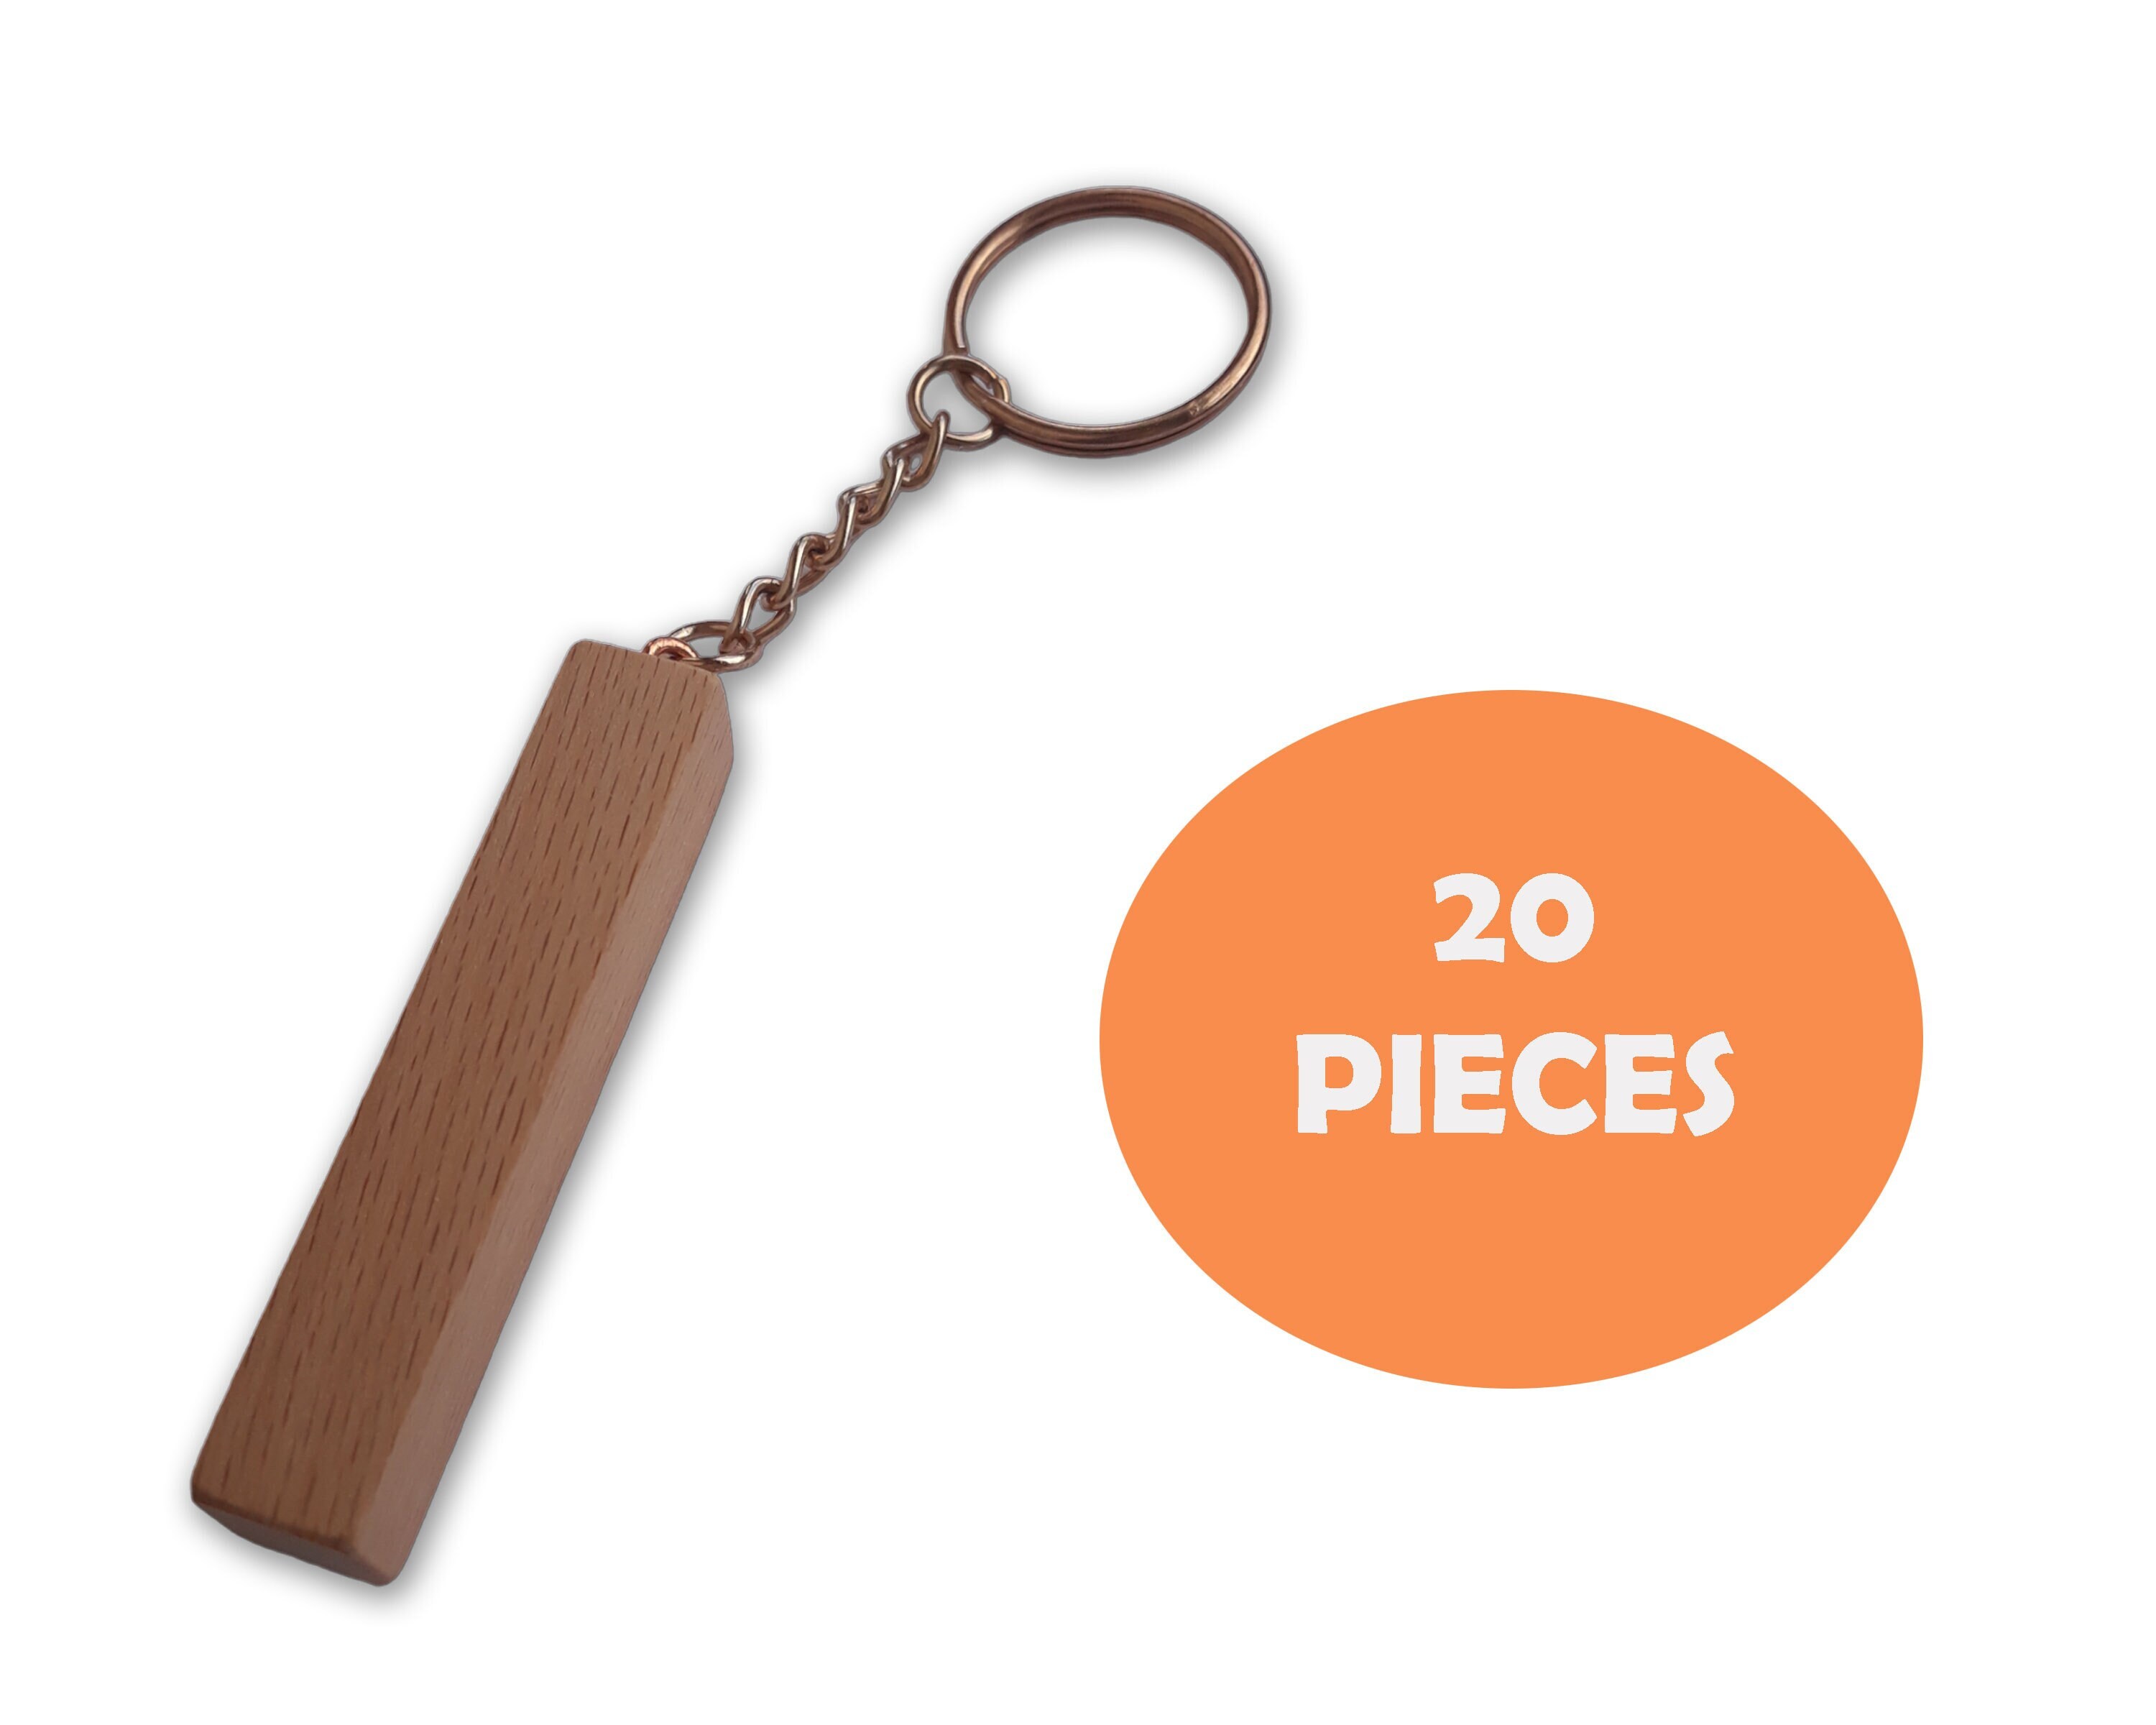 tailai wood keychain for diy crafts